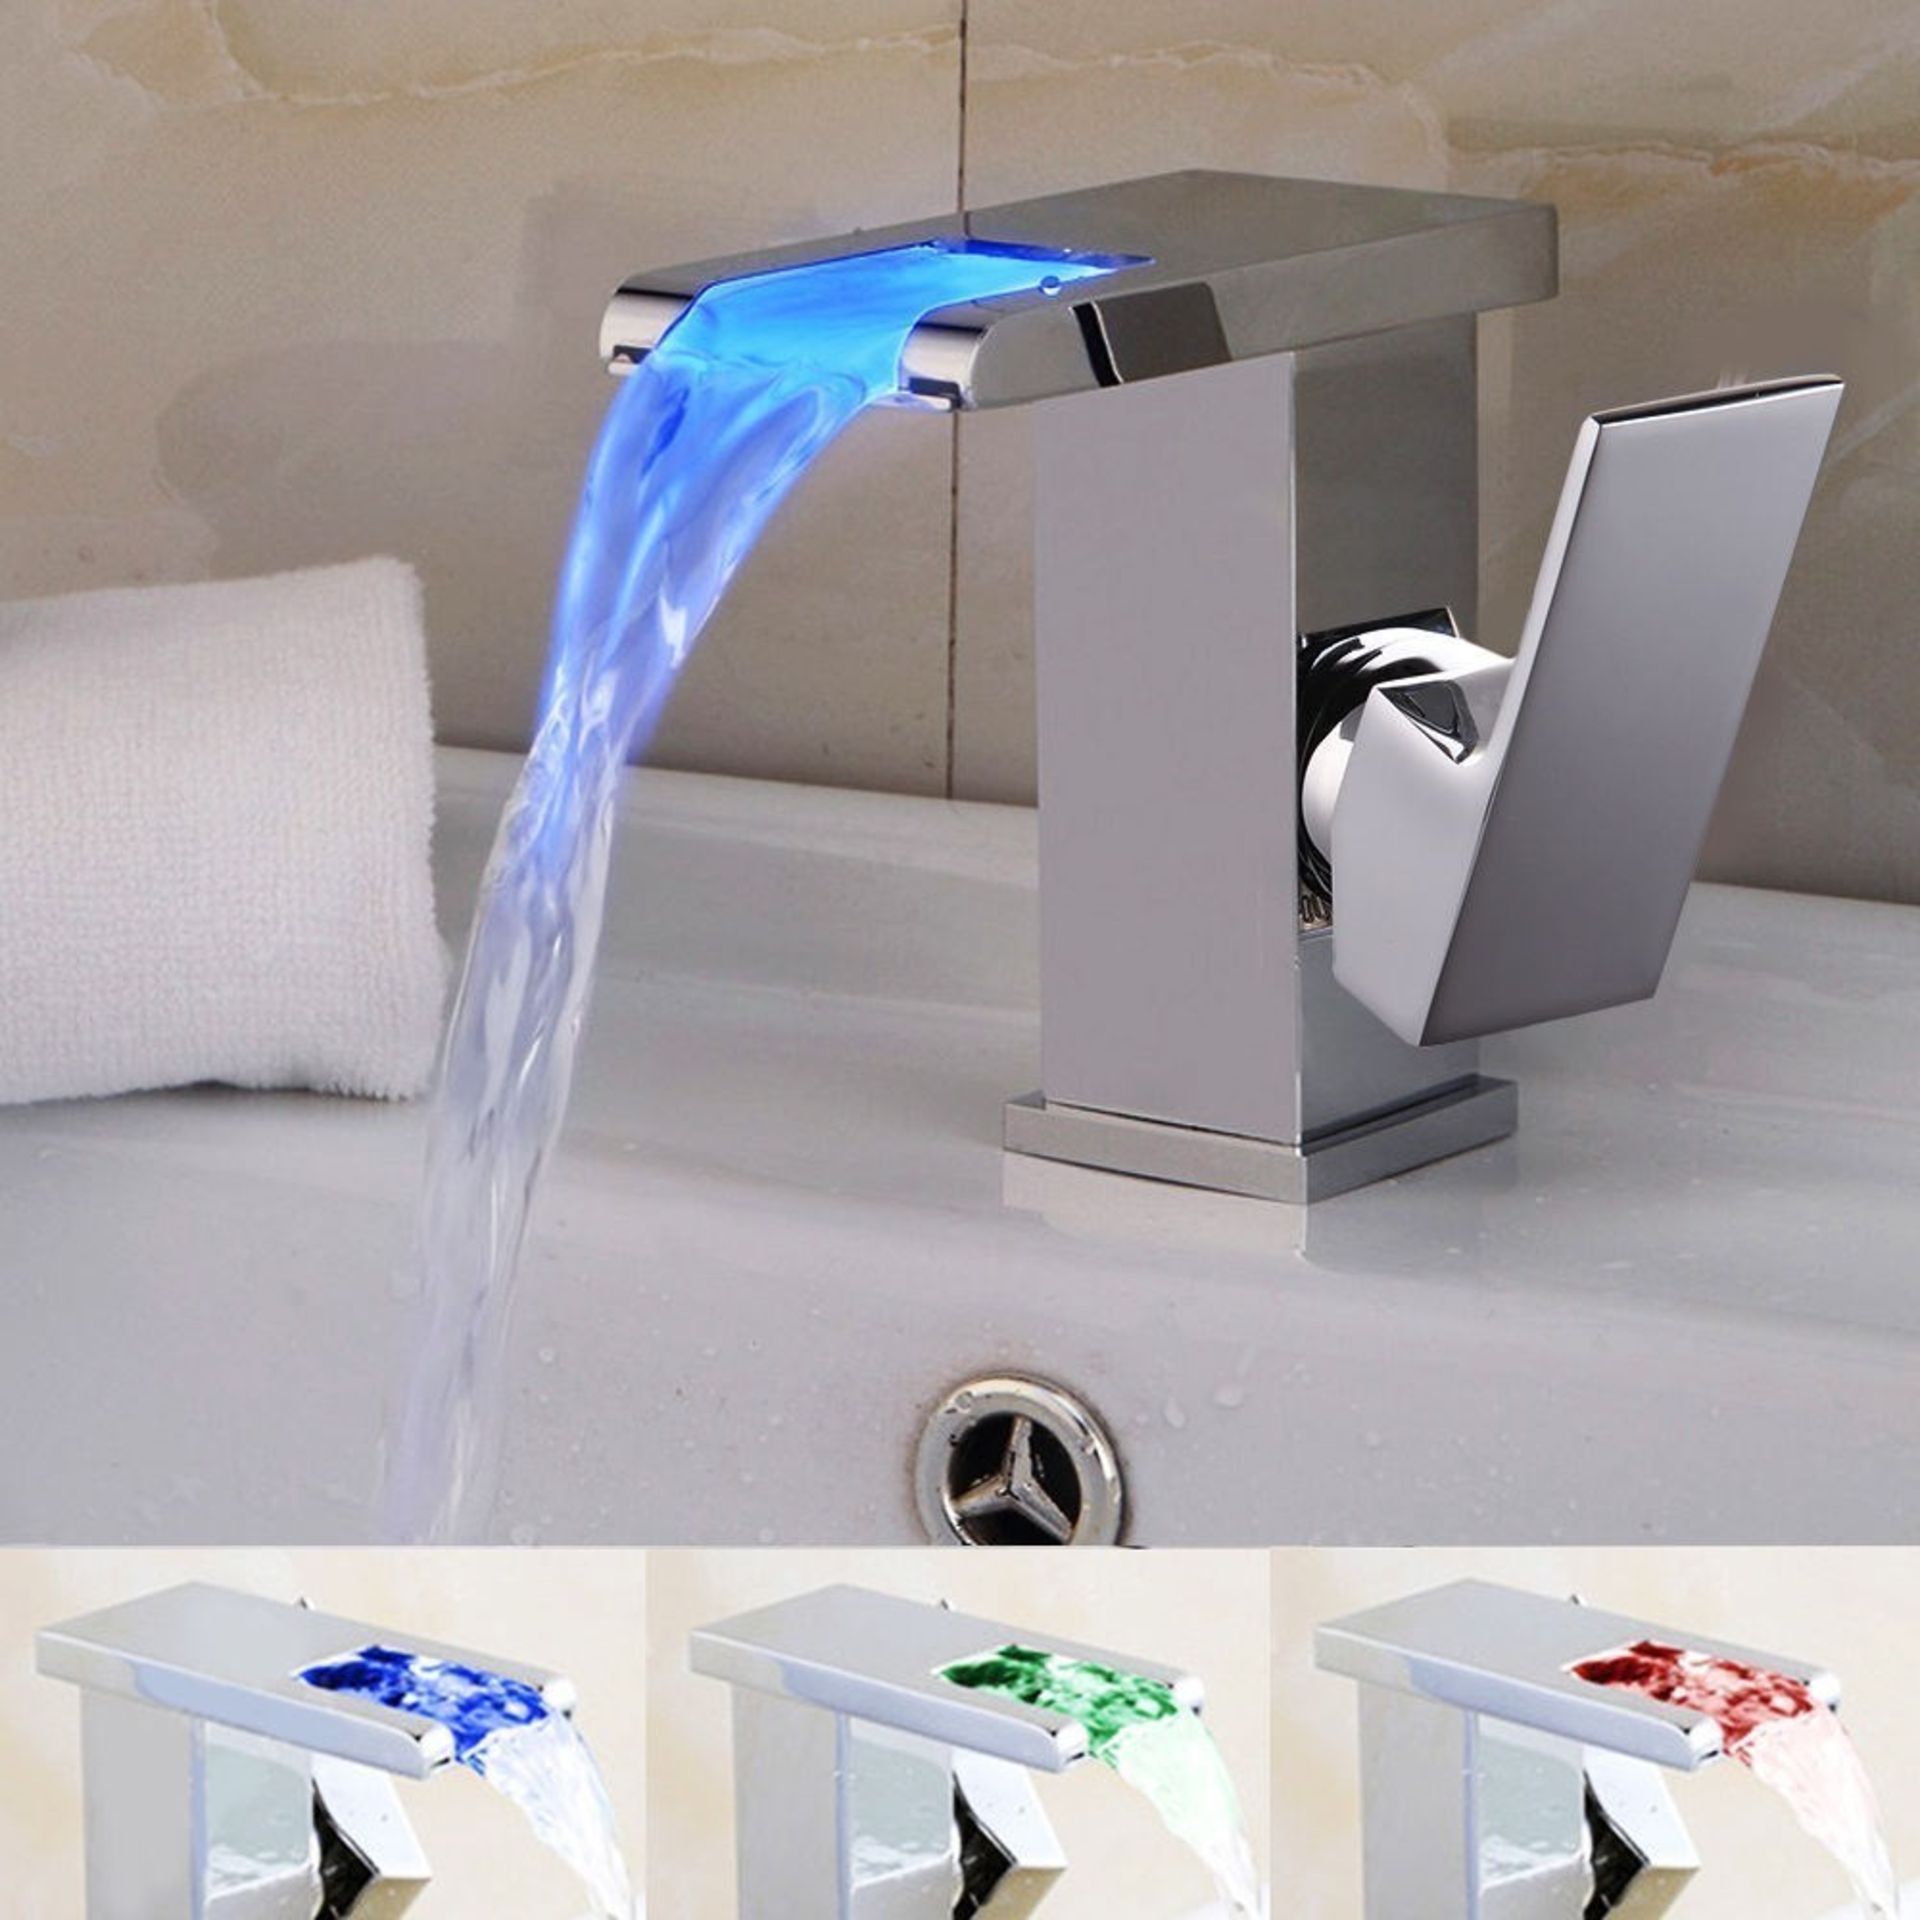 (M1098) LED Waterfall Bathroom Basin Mixer Tap. RRP £229.99.Easy to install and clean. All c...